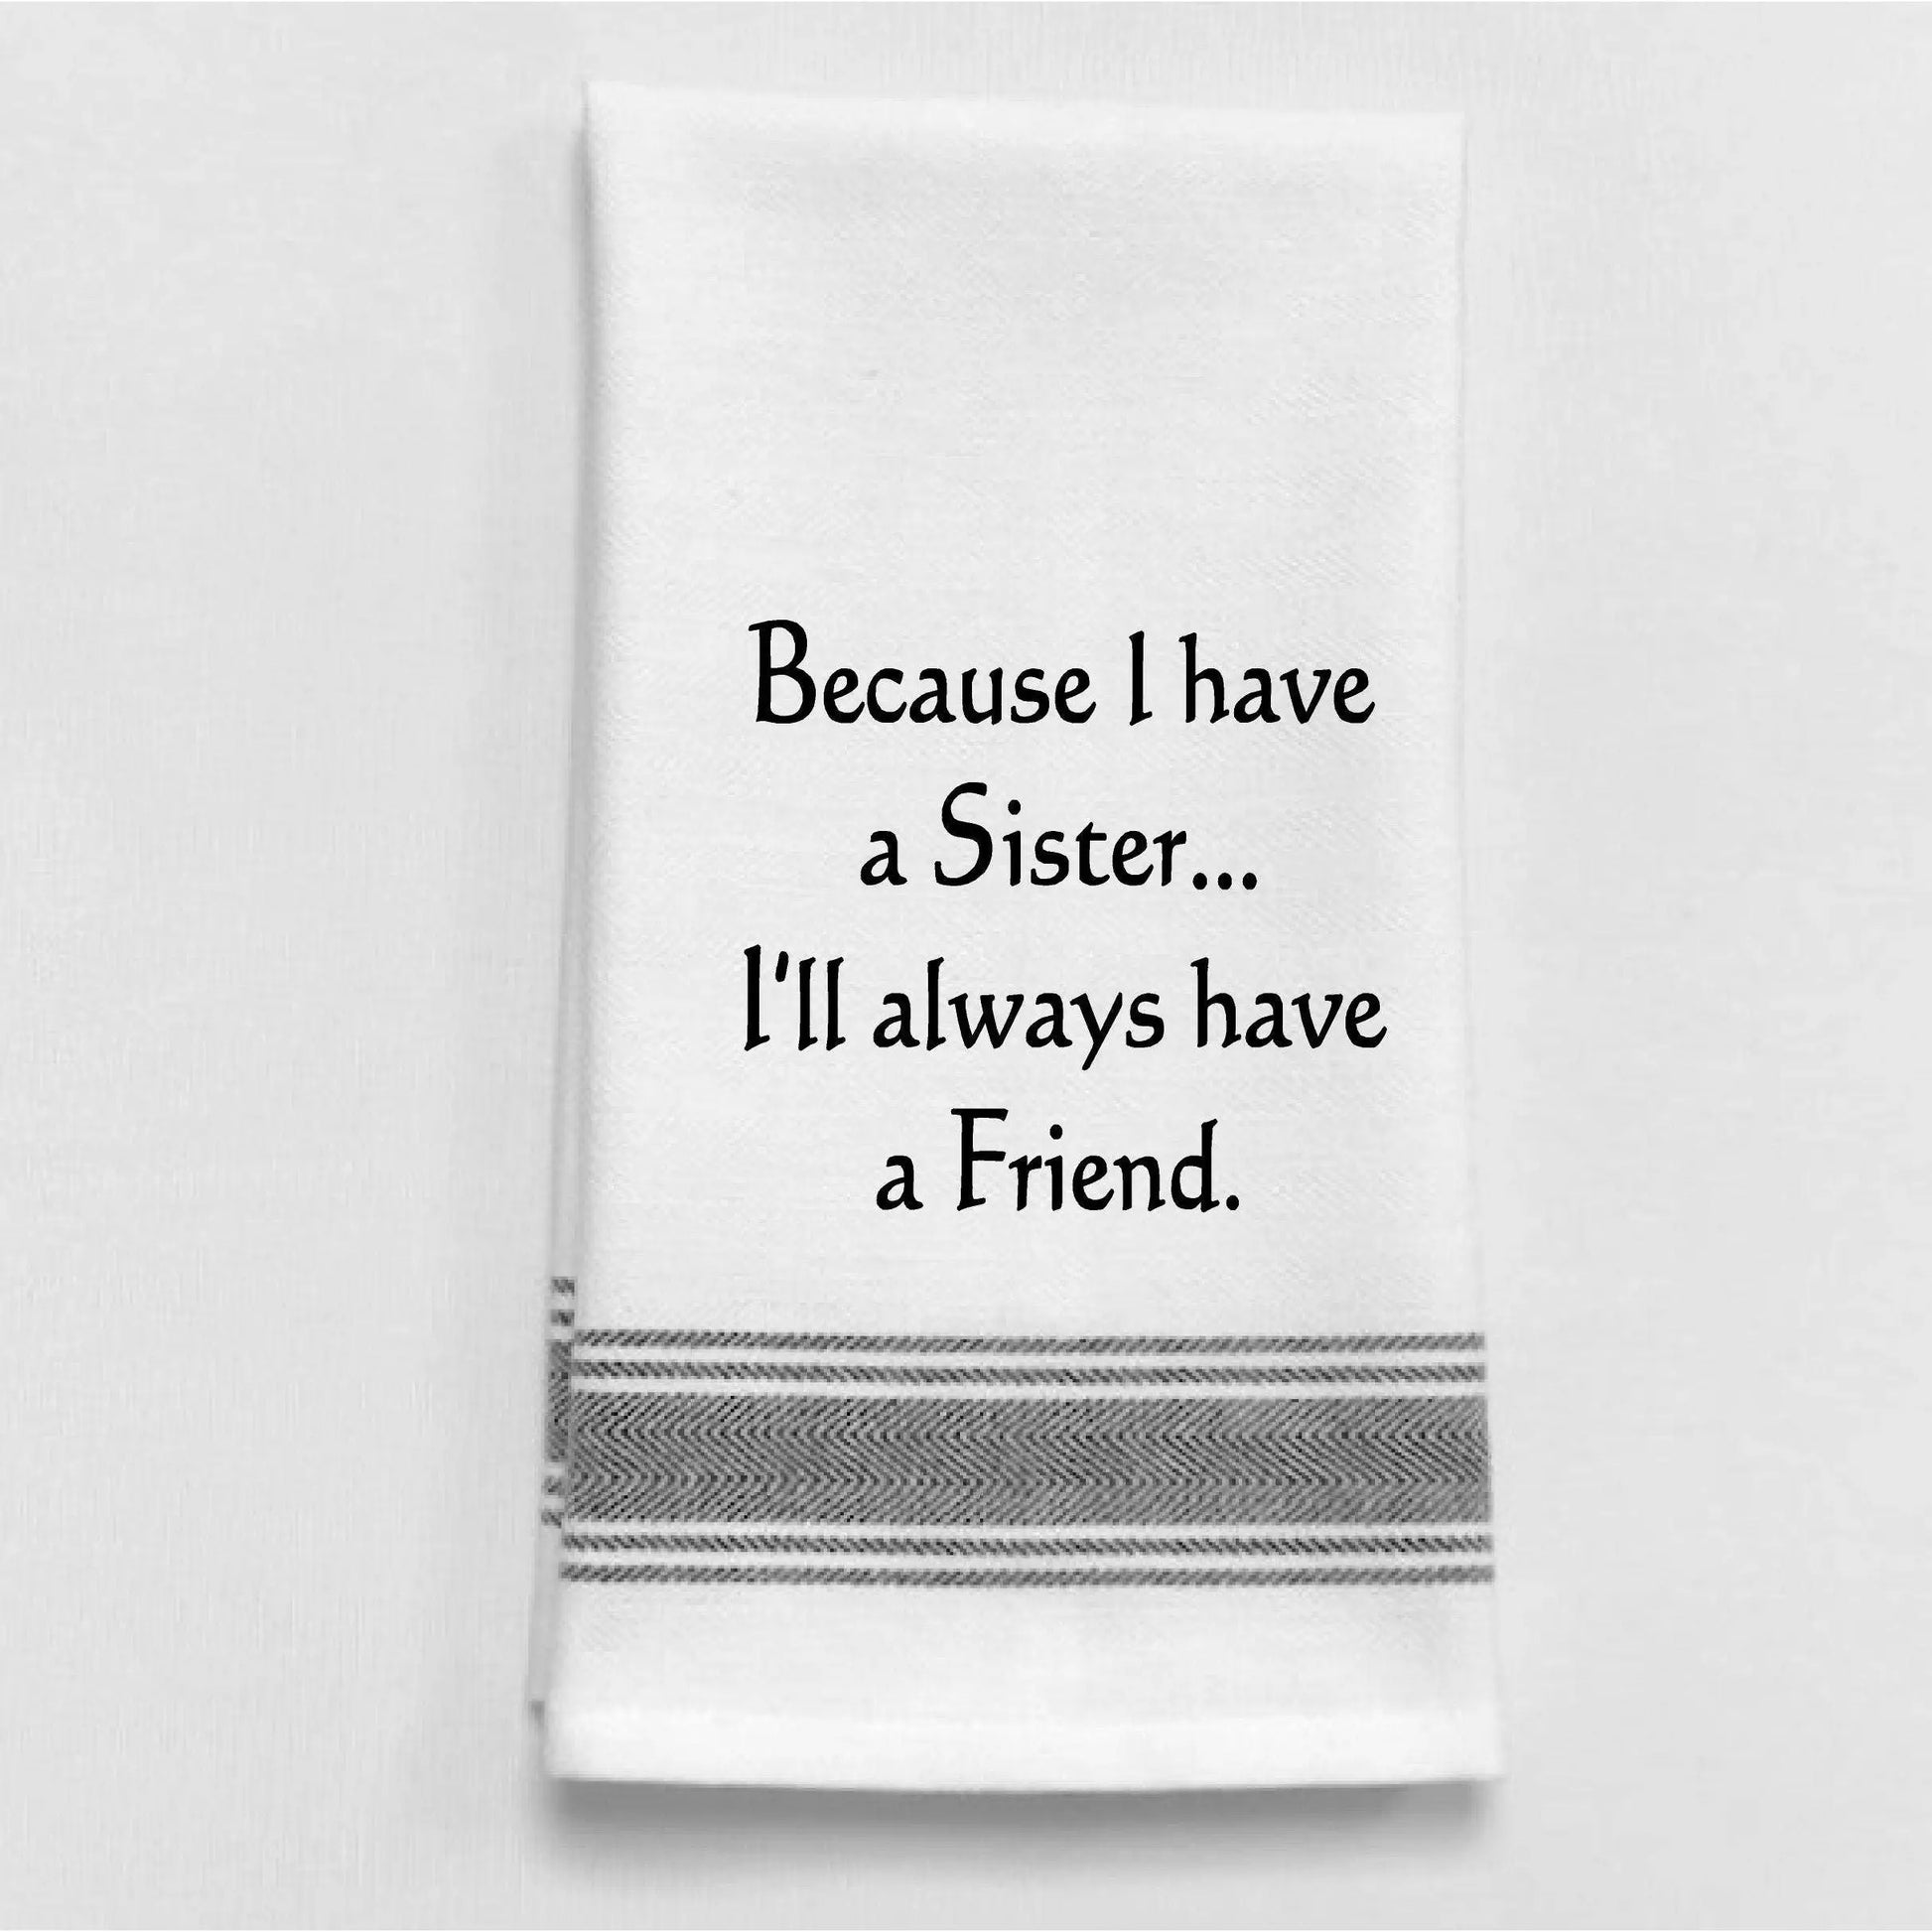 Because I have a Sister... I'll always... B+W Towel Wild Hare Designs